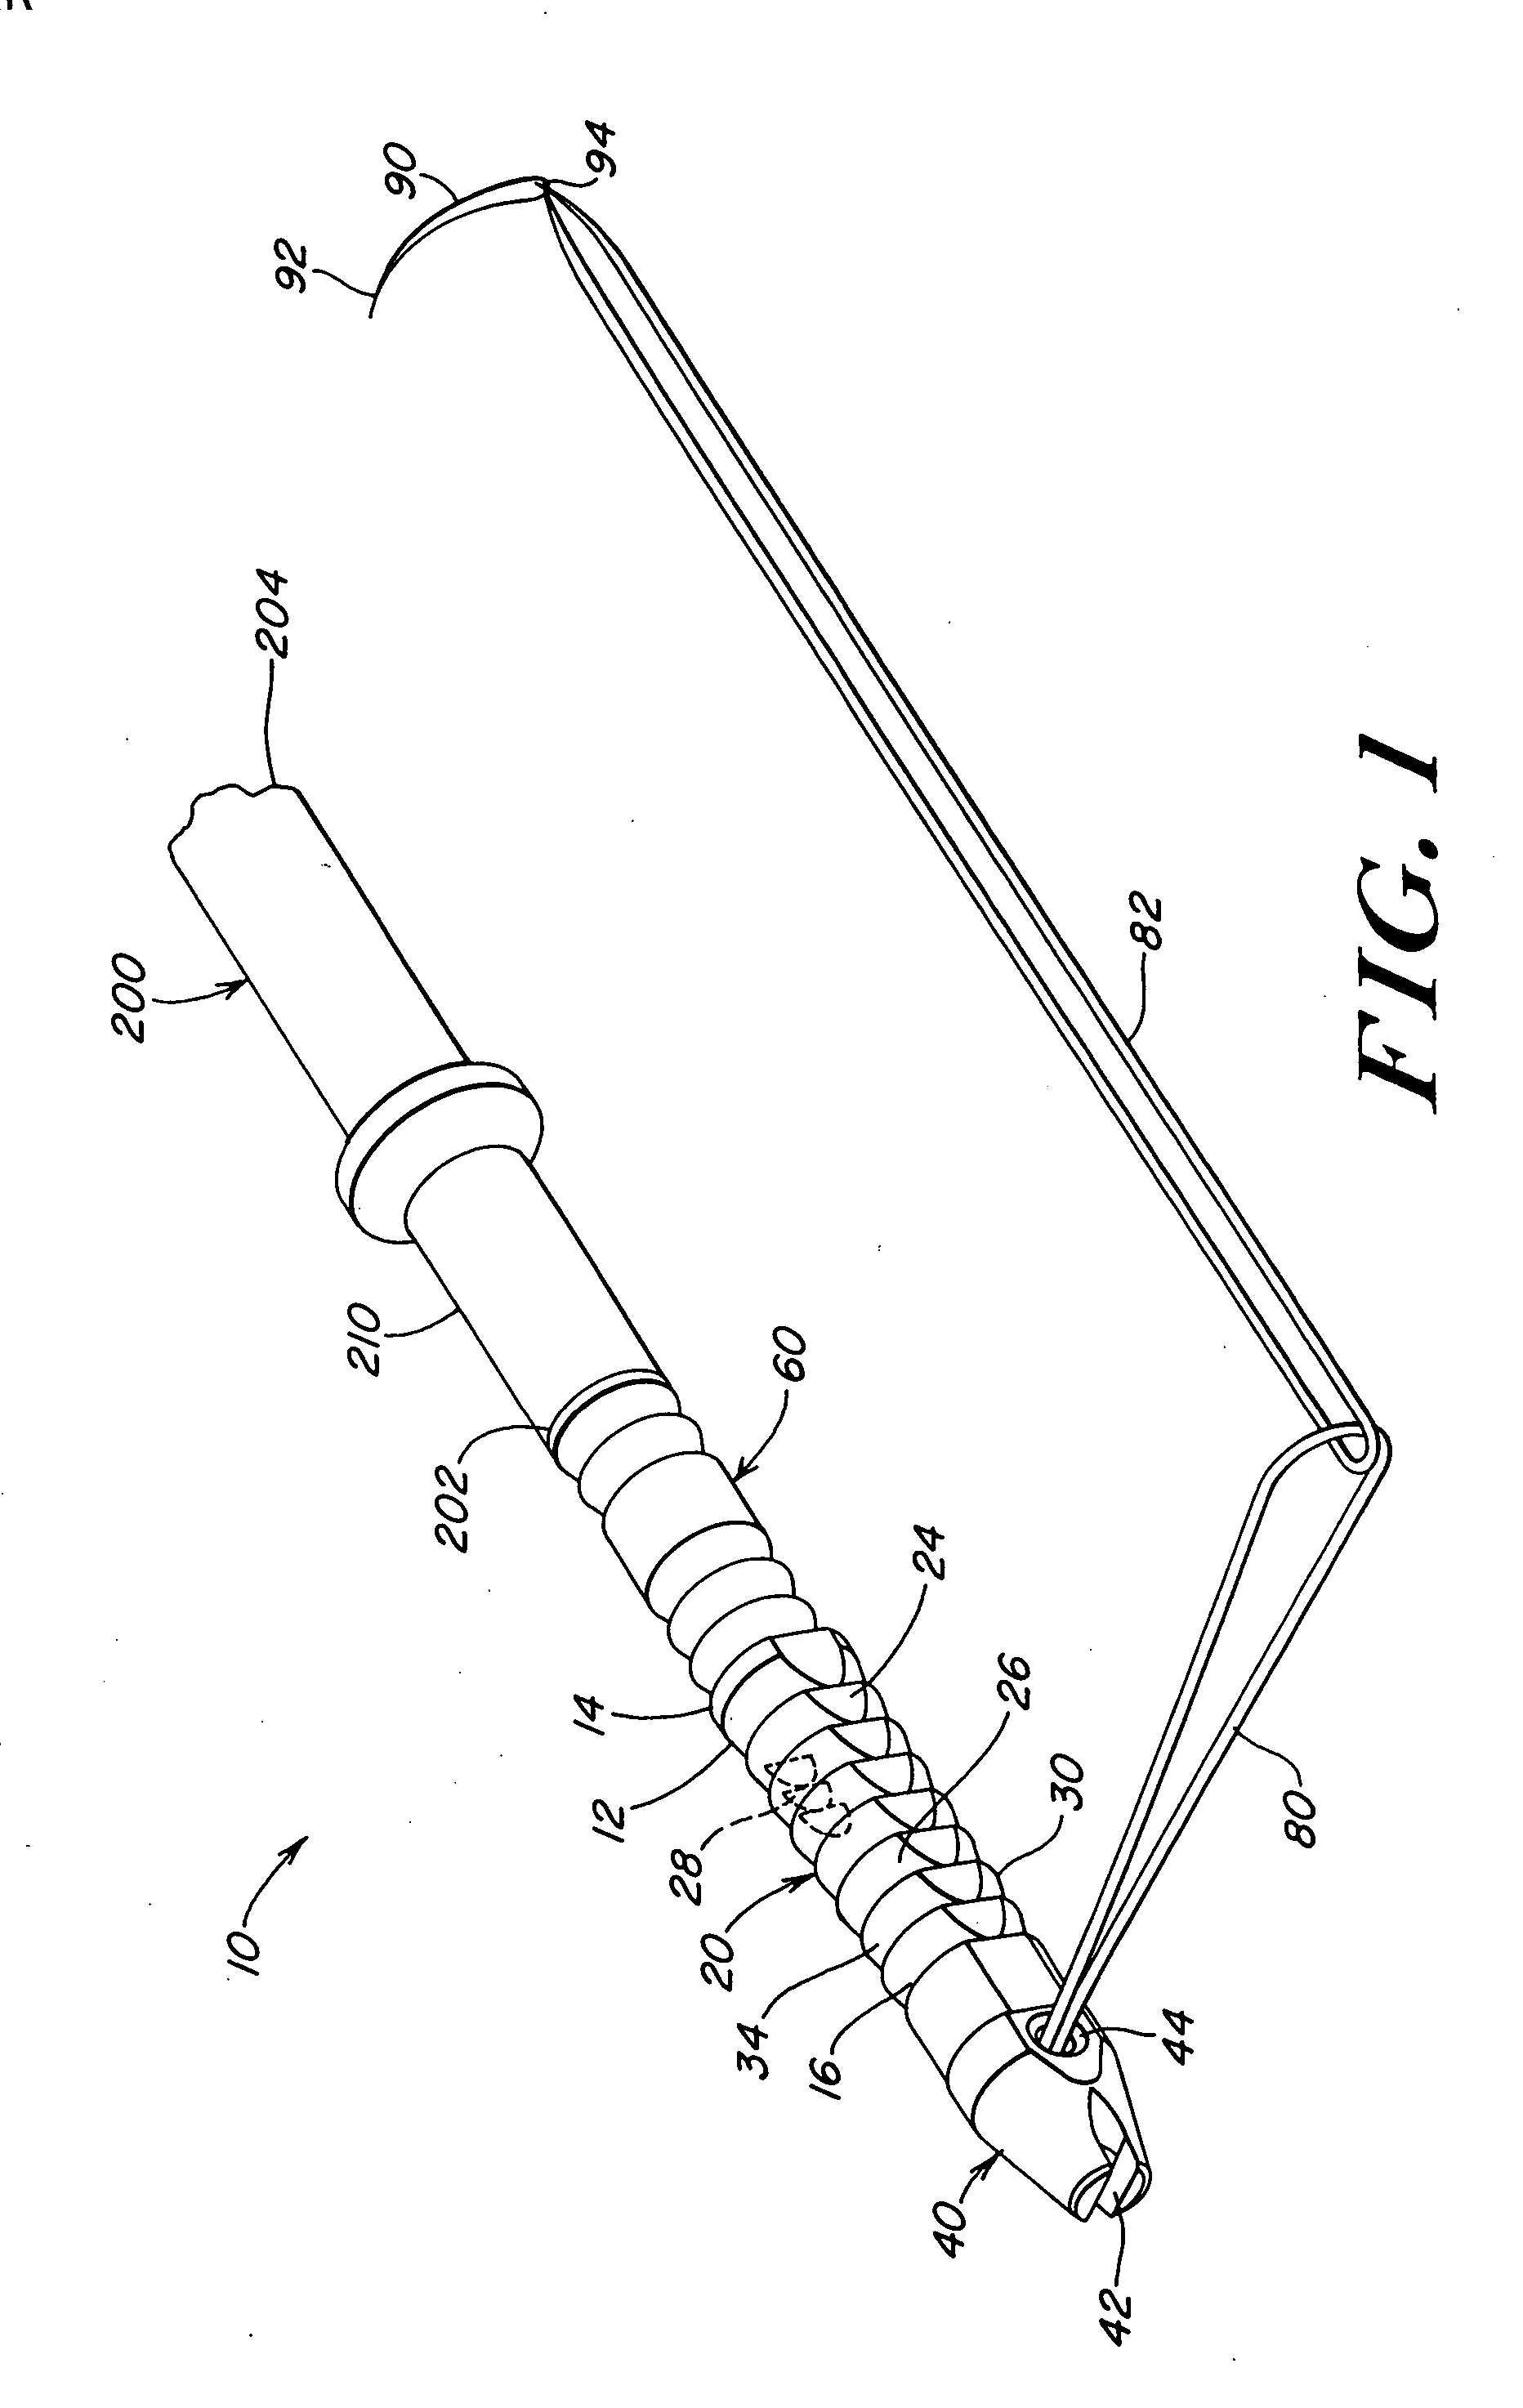 Knotless bioabsorbable suture anchor system and method